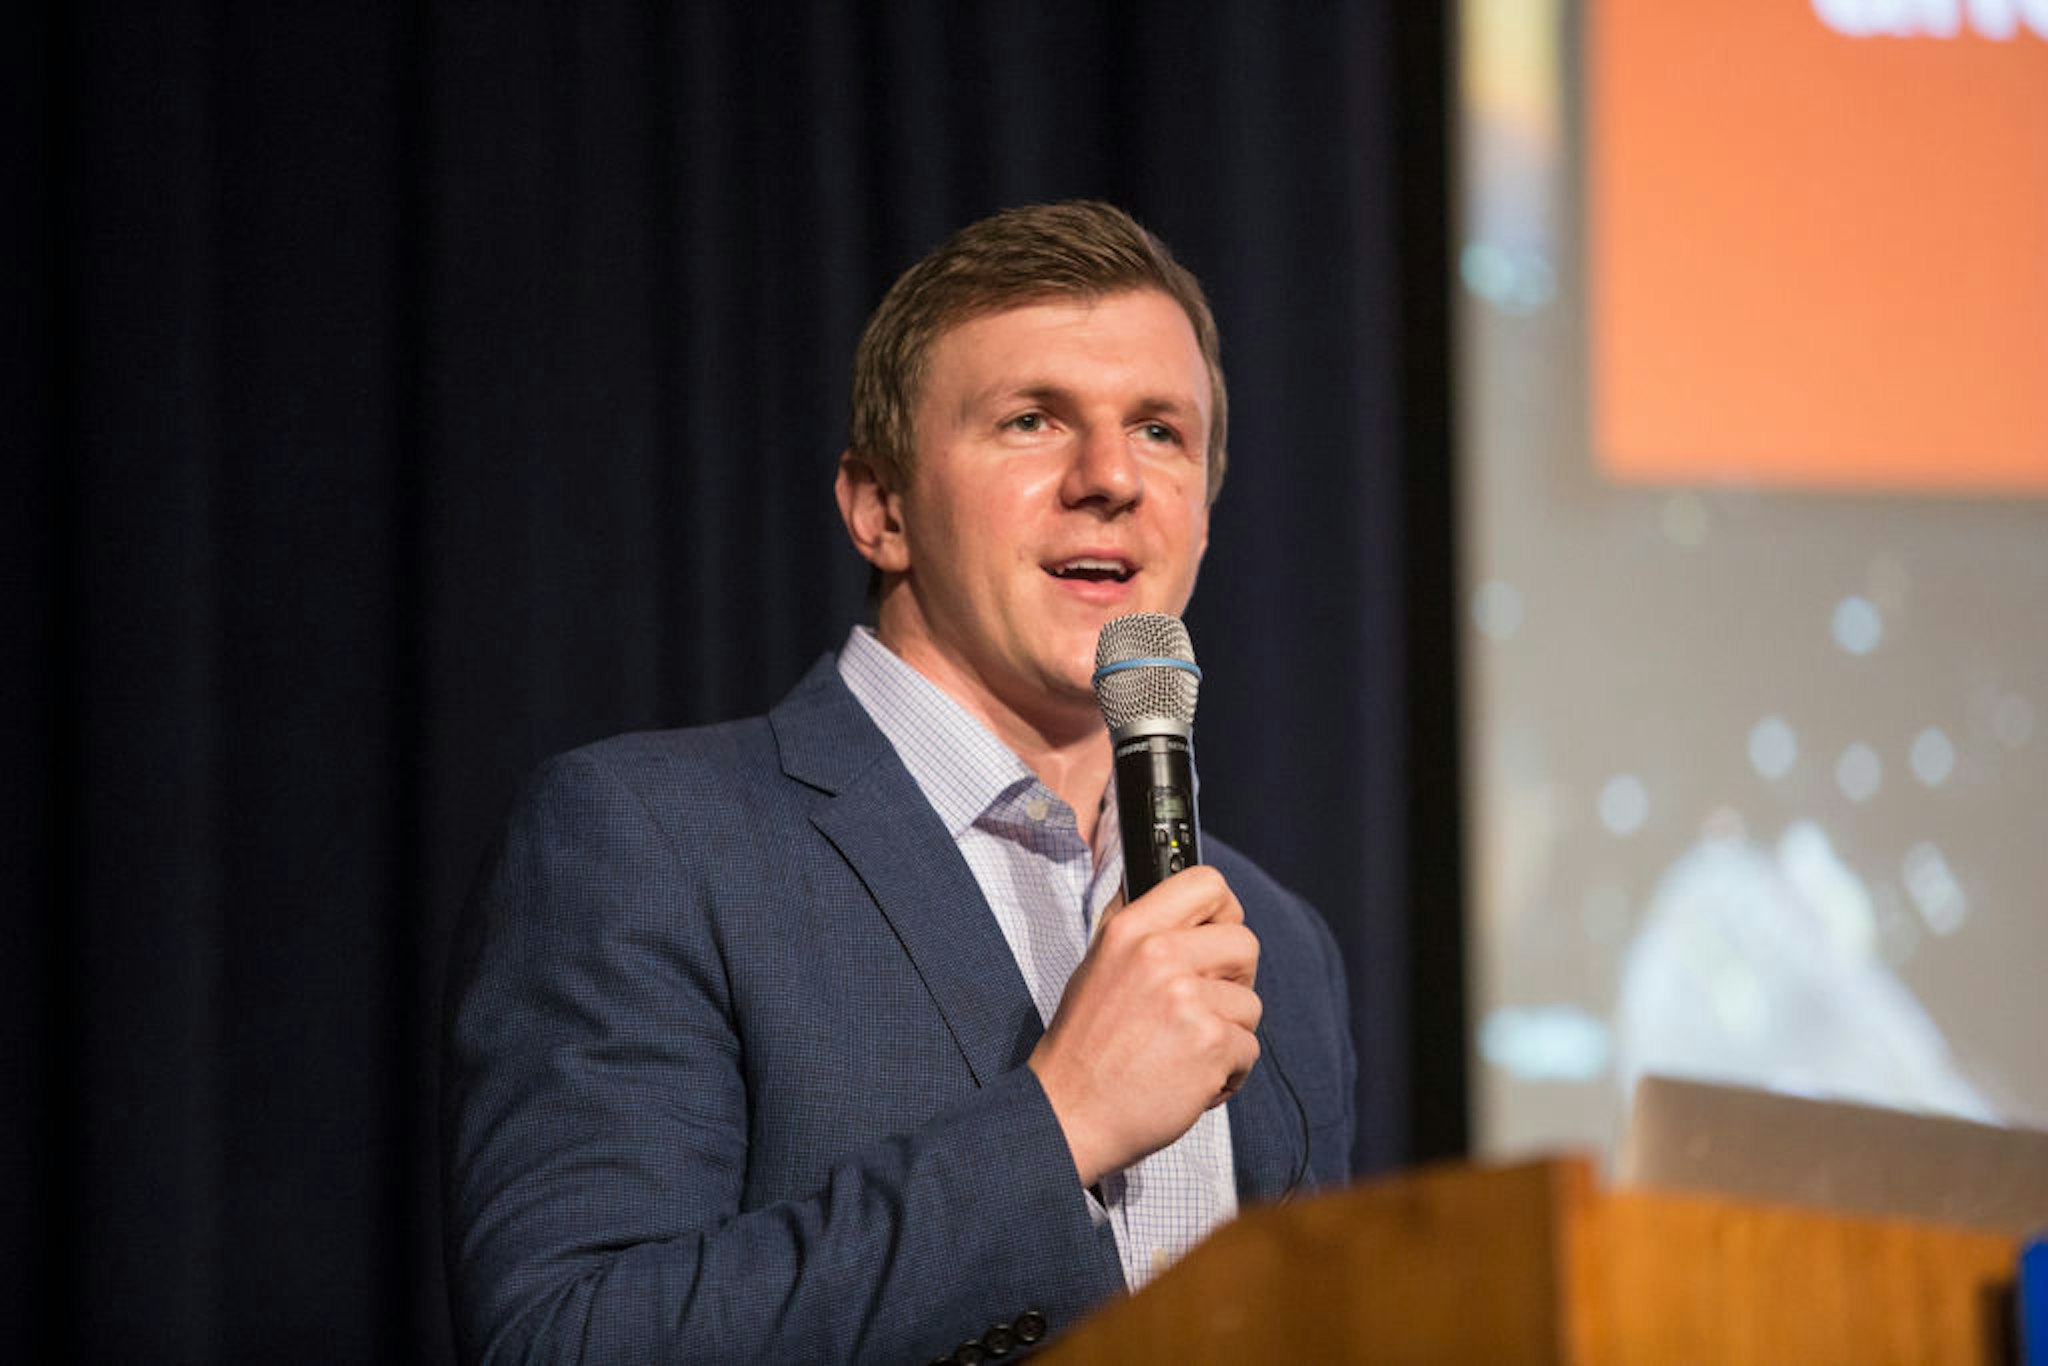 DALLAS, TX - NOVEMBER 29: James OKeefe, founder of Project Veritas, speaks about the organizations work to a gathering hosted by the Young Americans for Freedom at Southern Methodist University on Wednesday, November 29, 2017.